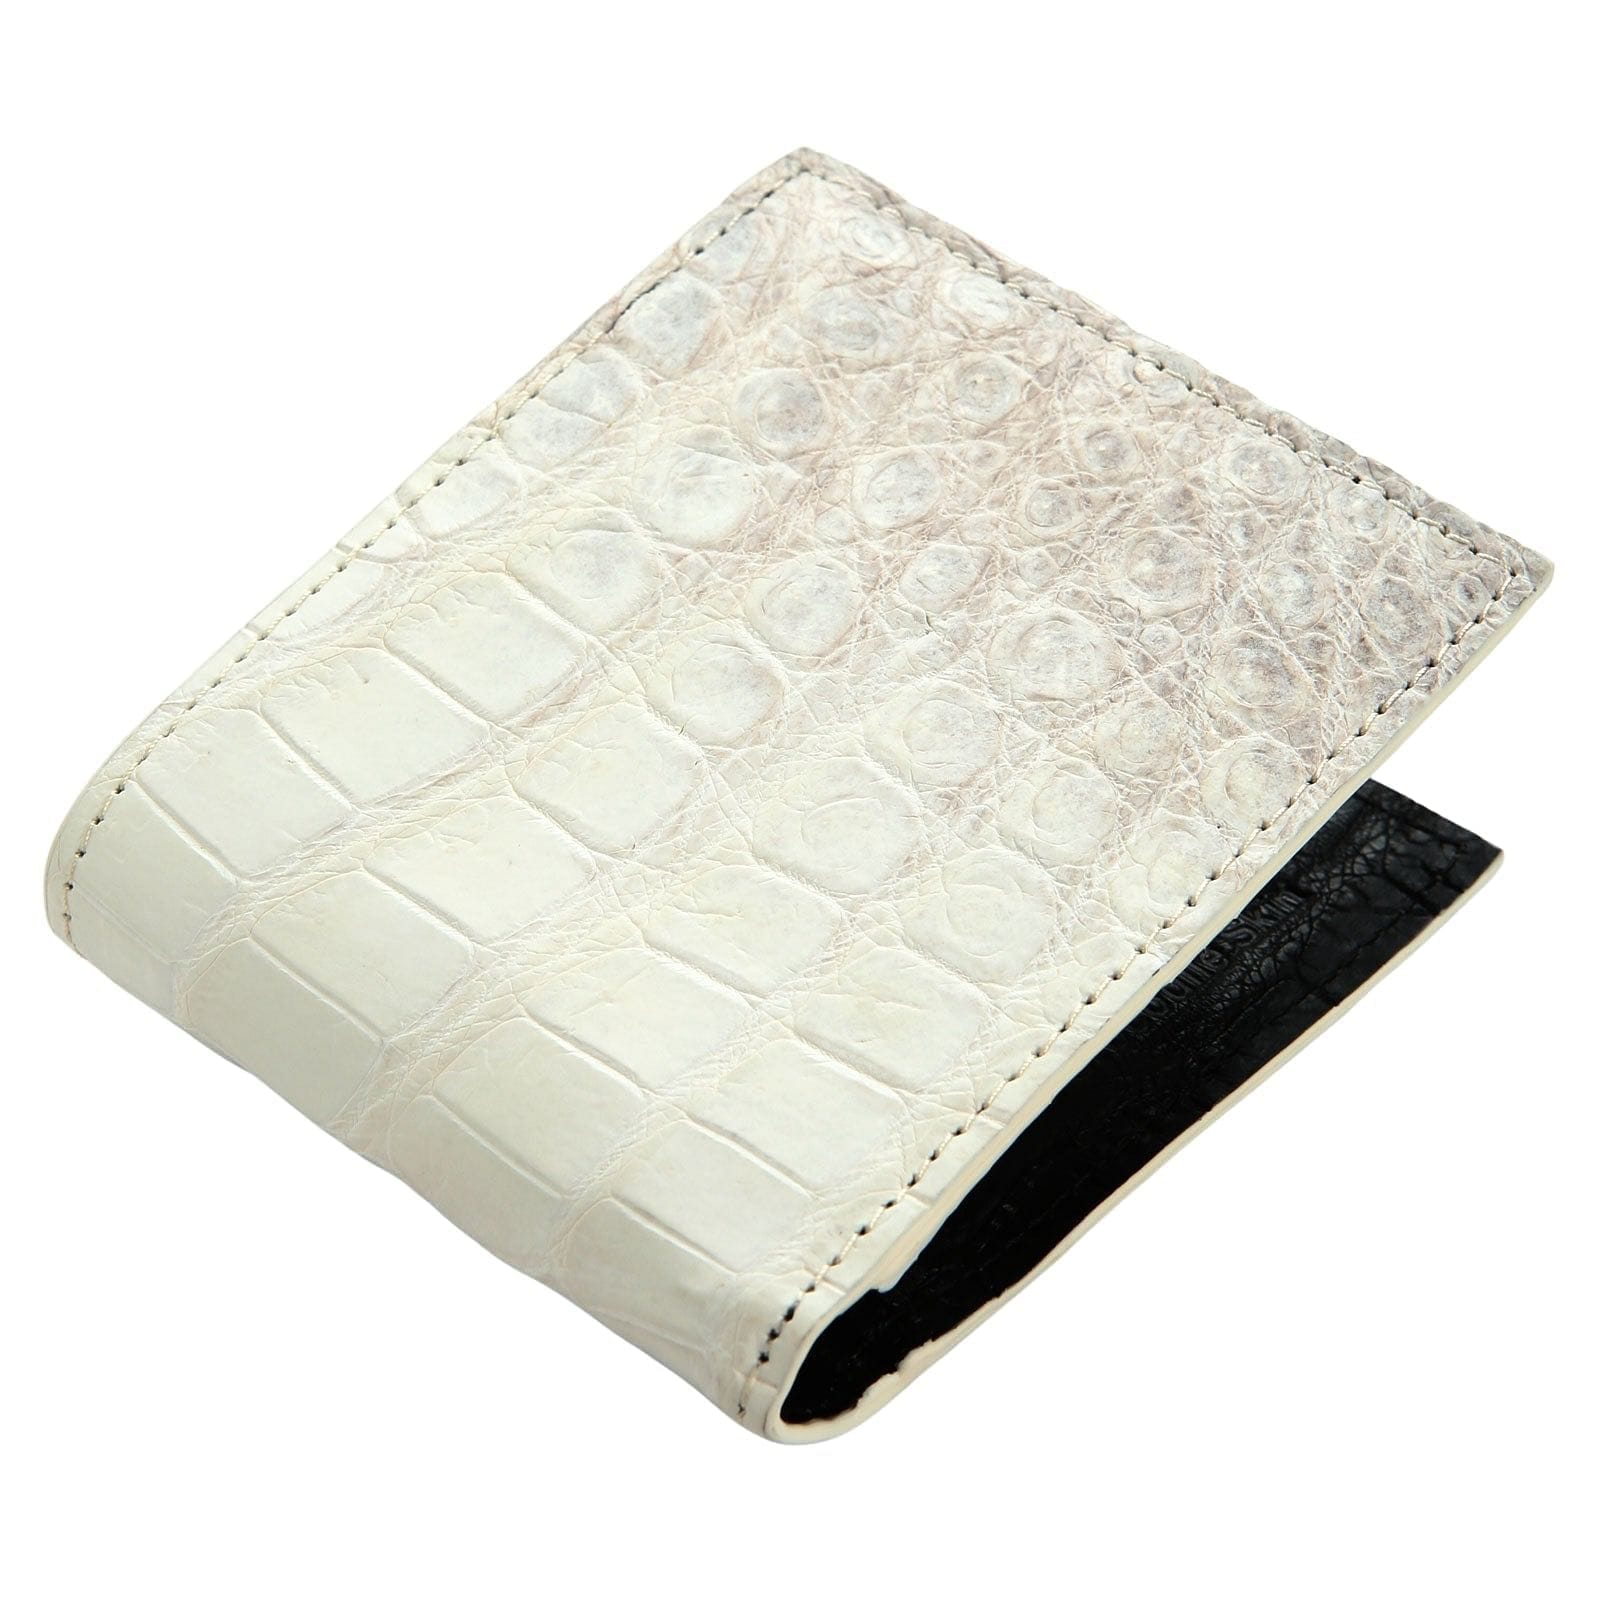 Authentic Real Crocodile Belly Skin Businessmen Long Bifold Wallet